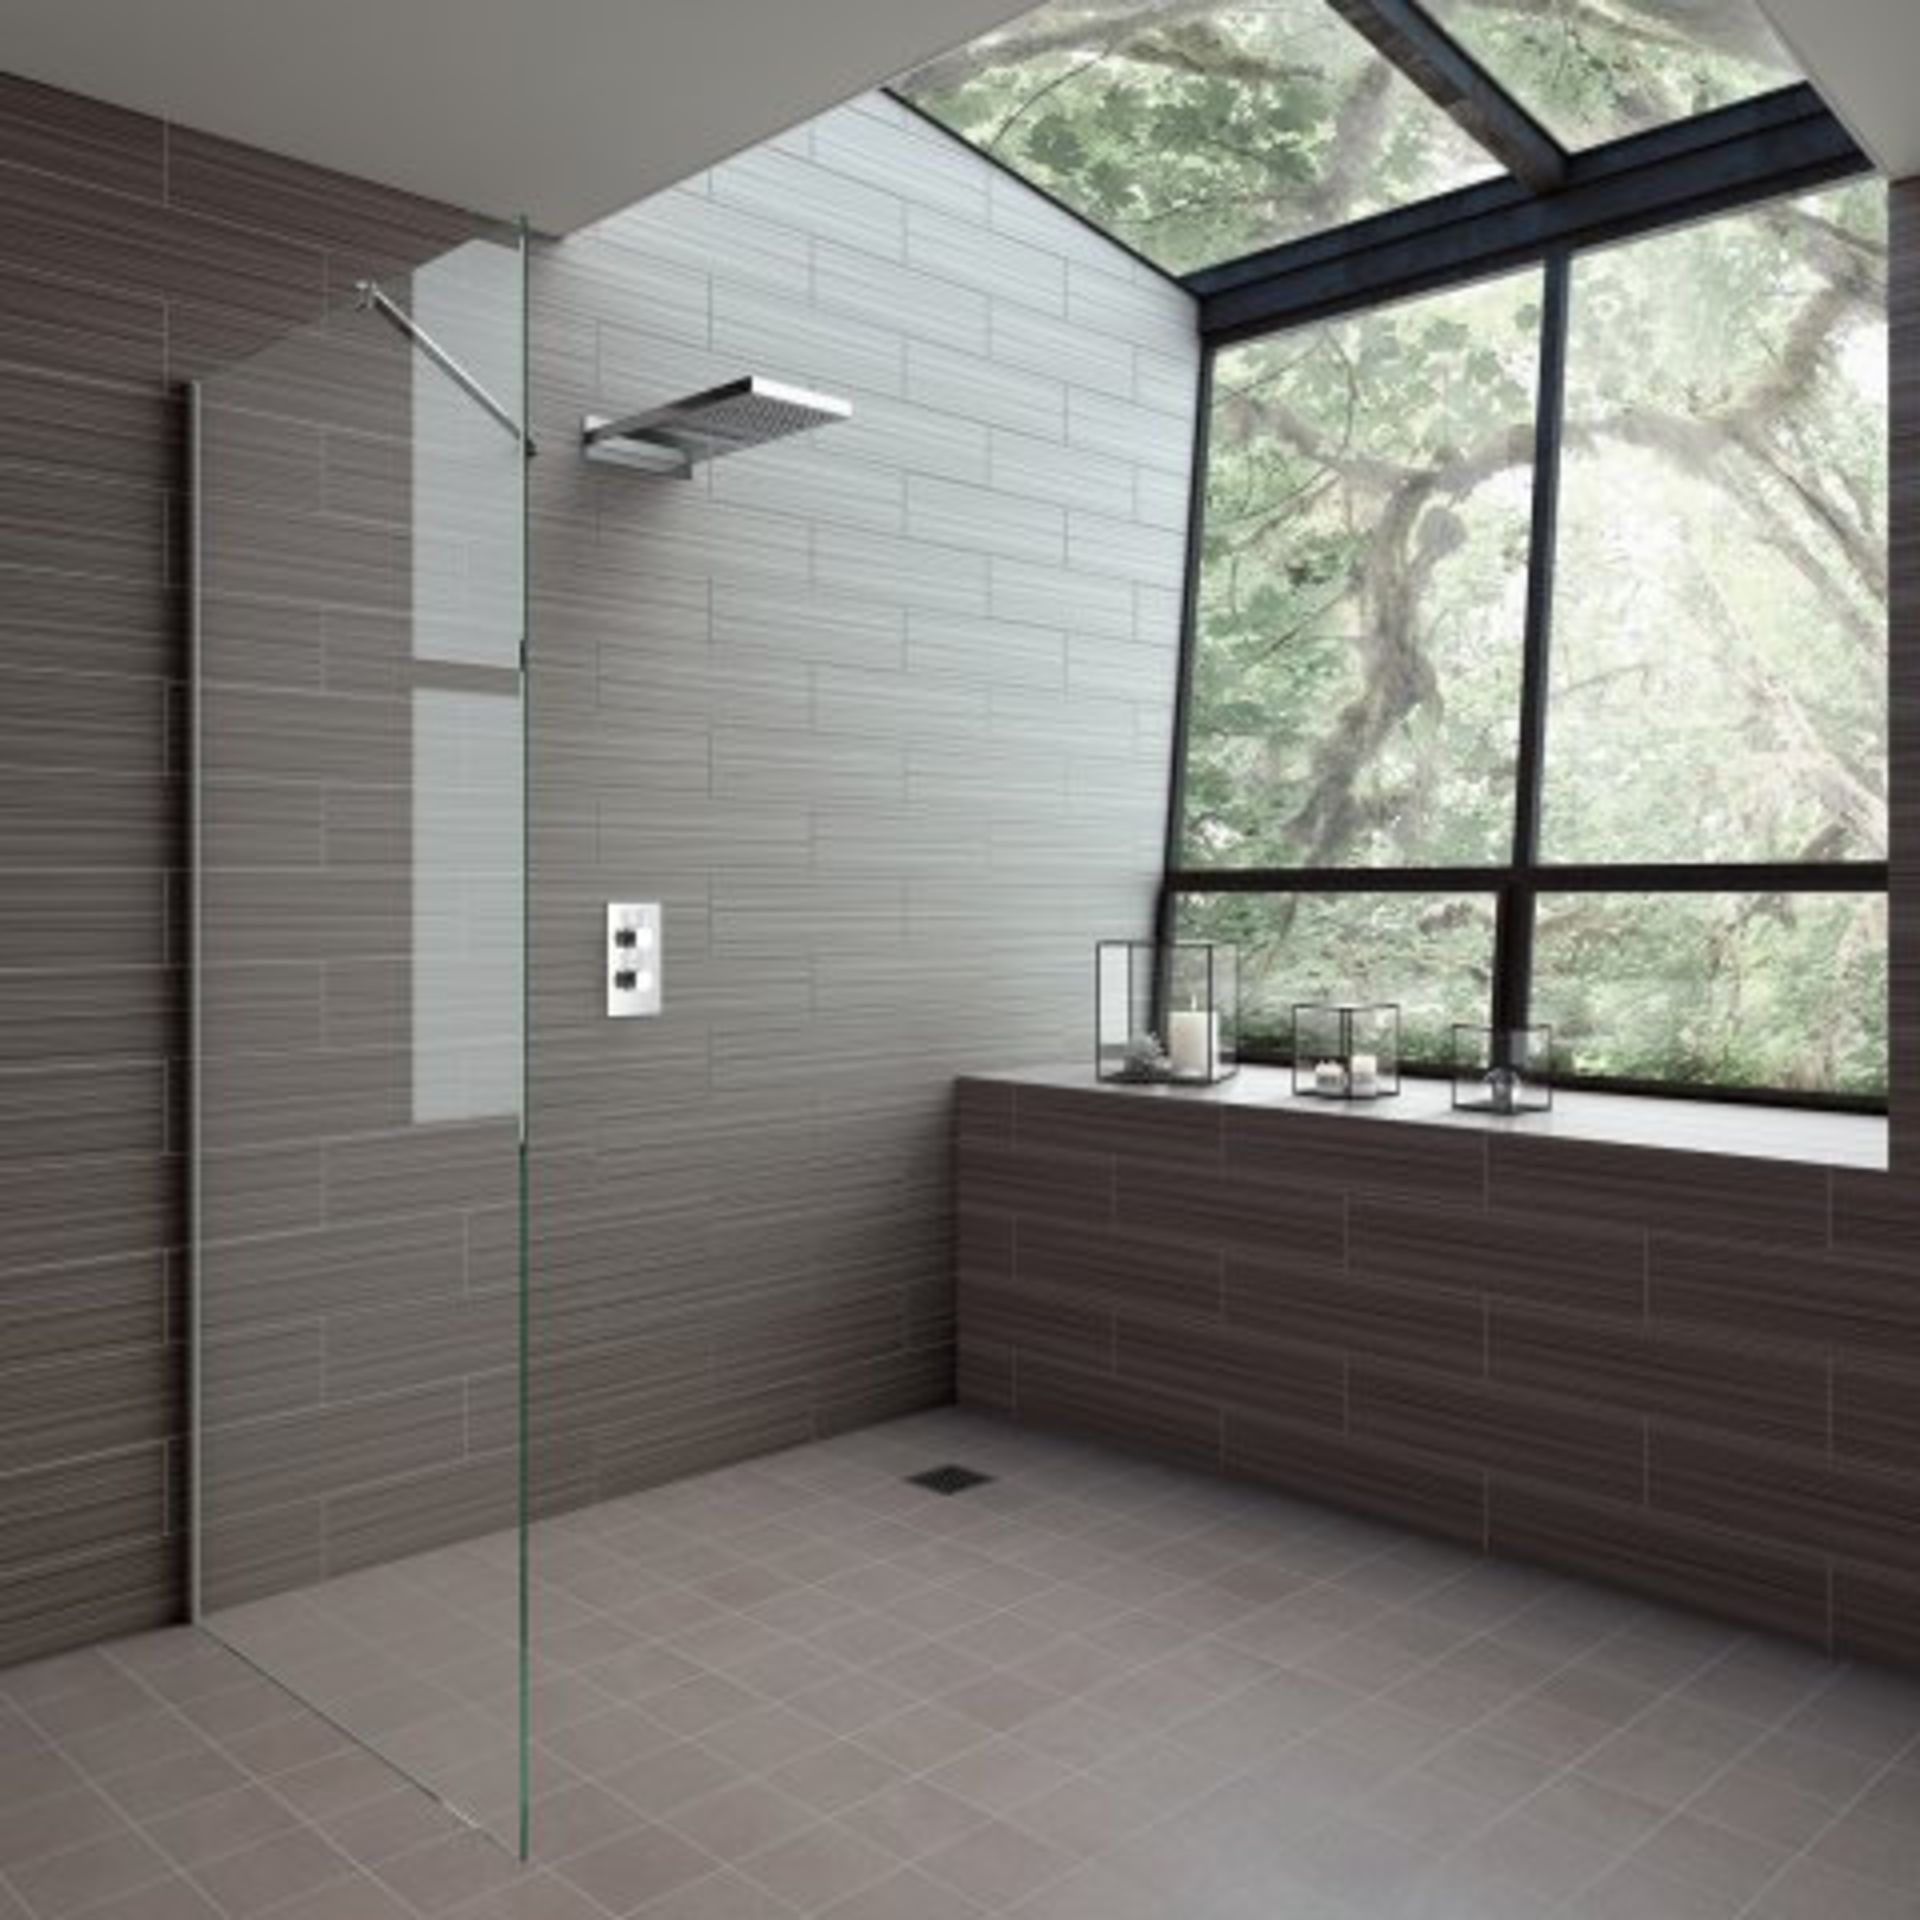 (I22) Stainless Steel 230x500mm Waterfall Shower Head. RRP £374.98. "What An Experience": Enjoy - Image 5 of 5